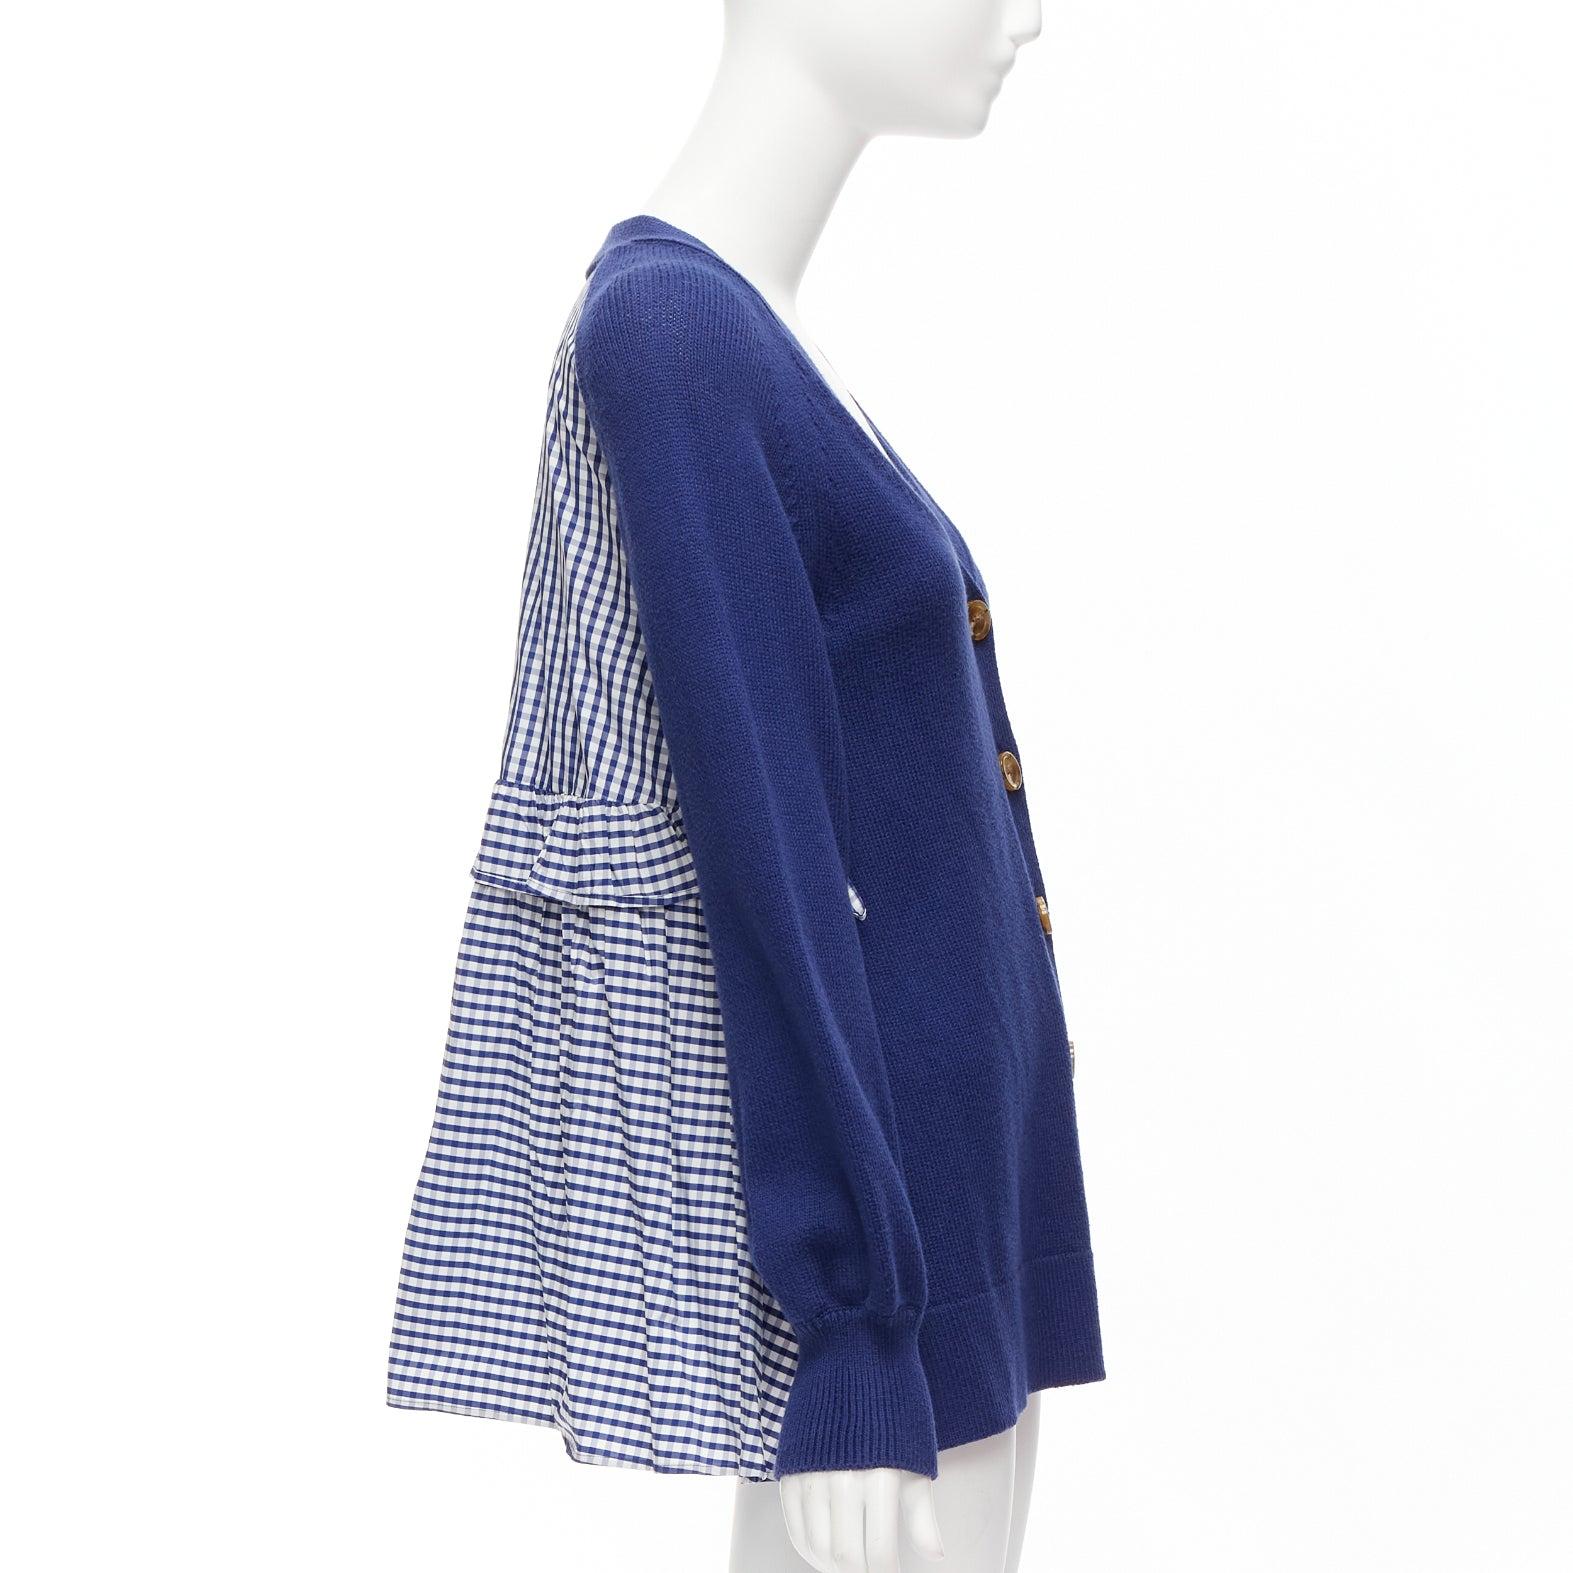 ADEAM blue cotton blend gingham ruffle back side tie cardigan sweater S
Reference: KYCG/A00022
Brand: Adeam
Material: Cotton, Blend
Color: Blue, White
Pattern: Gingham
Closure: Button
Extra Details: Blue white gingham print ruffled back.
Made in: